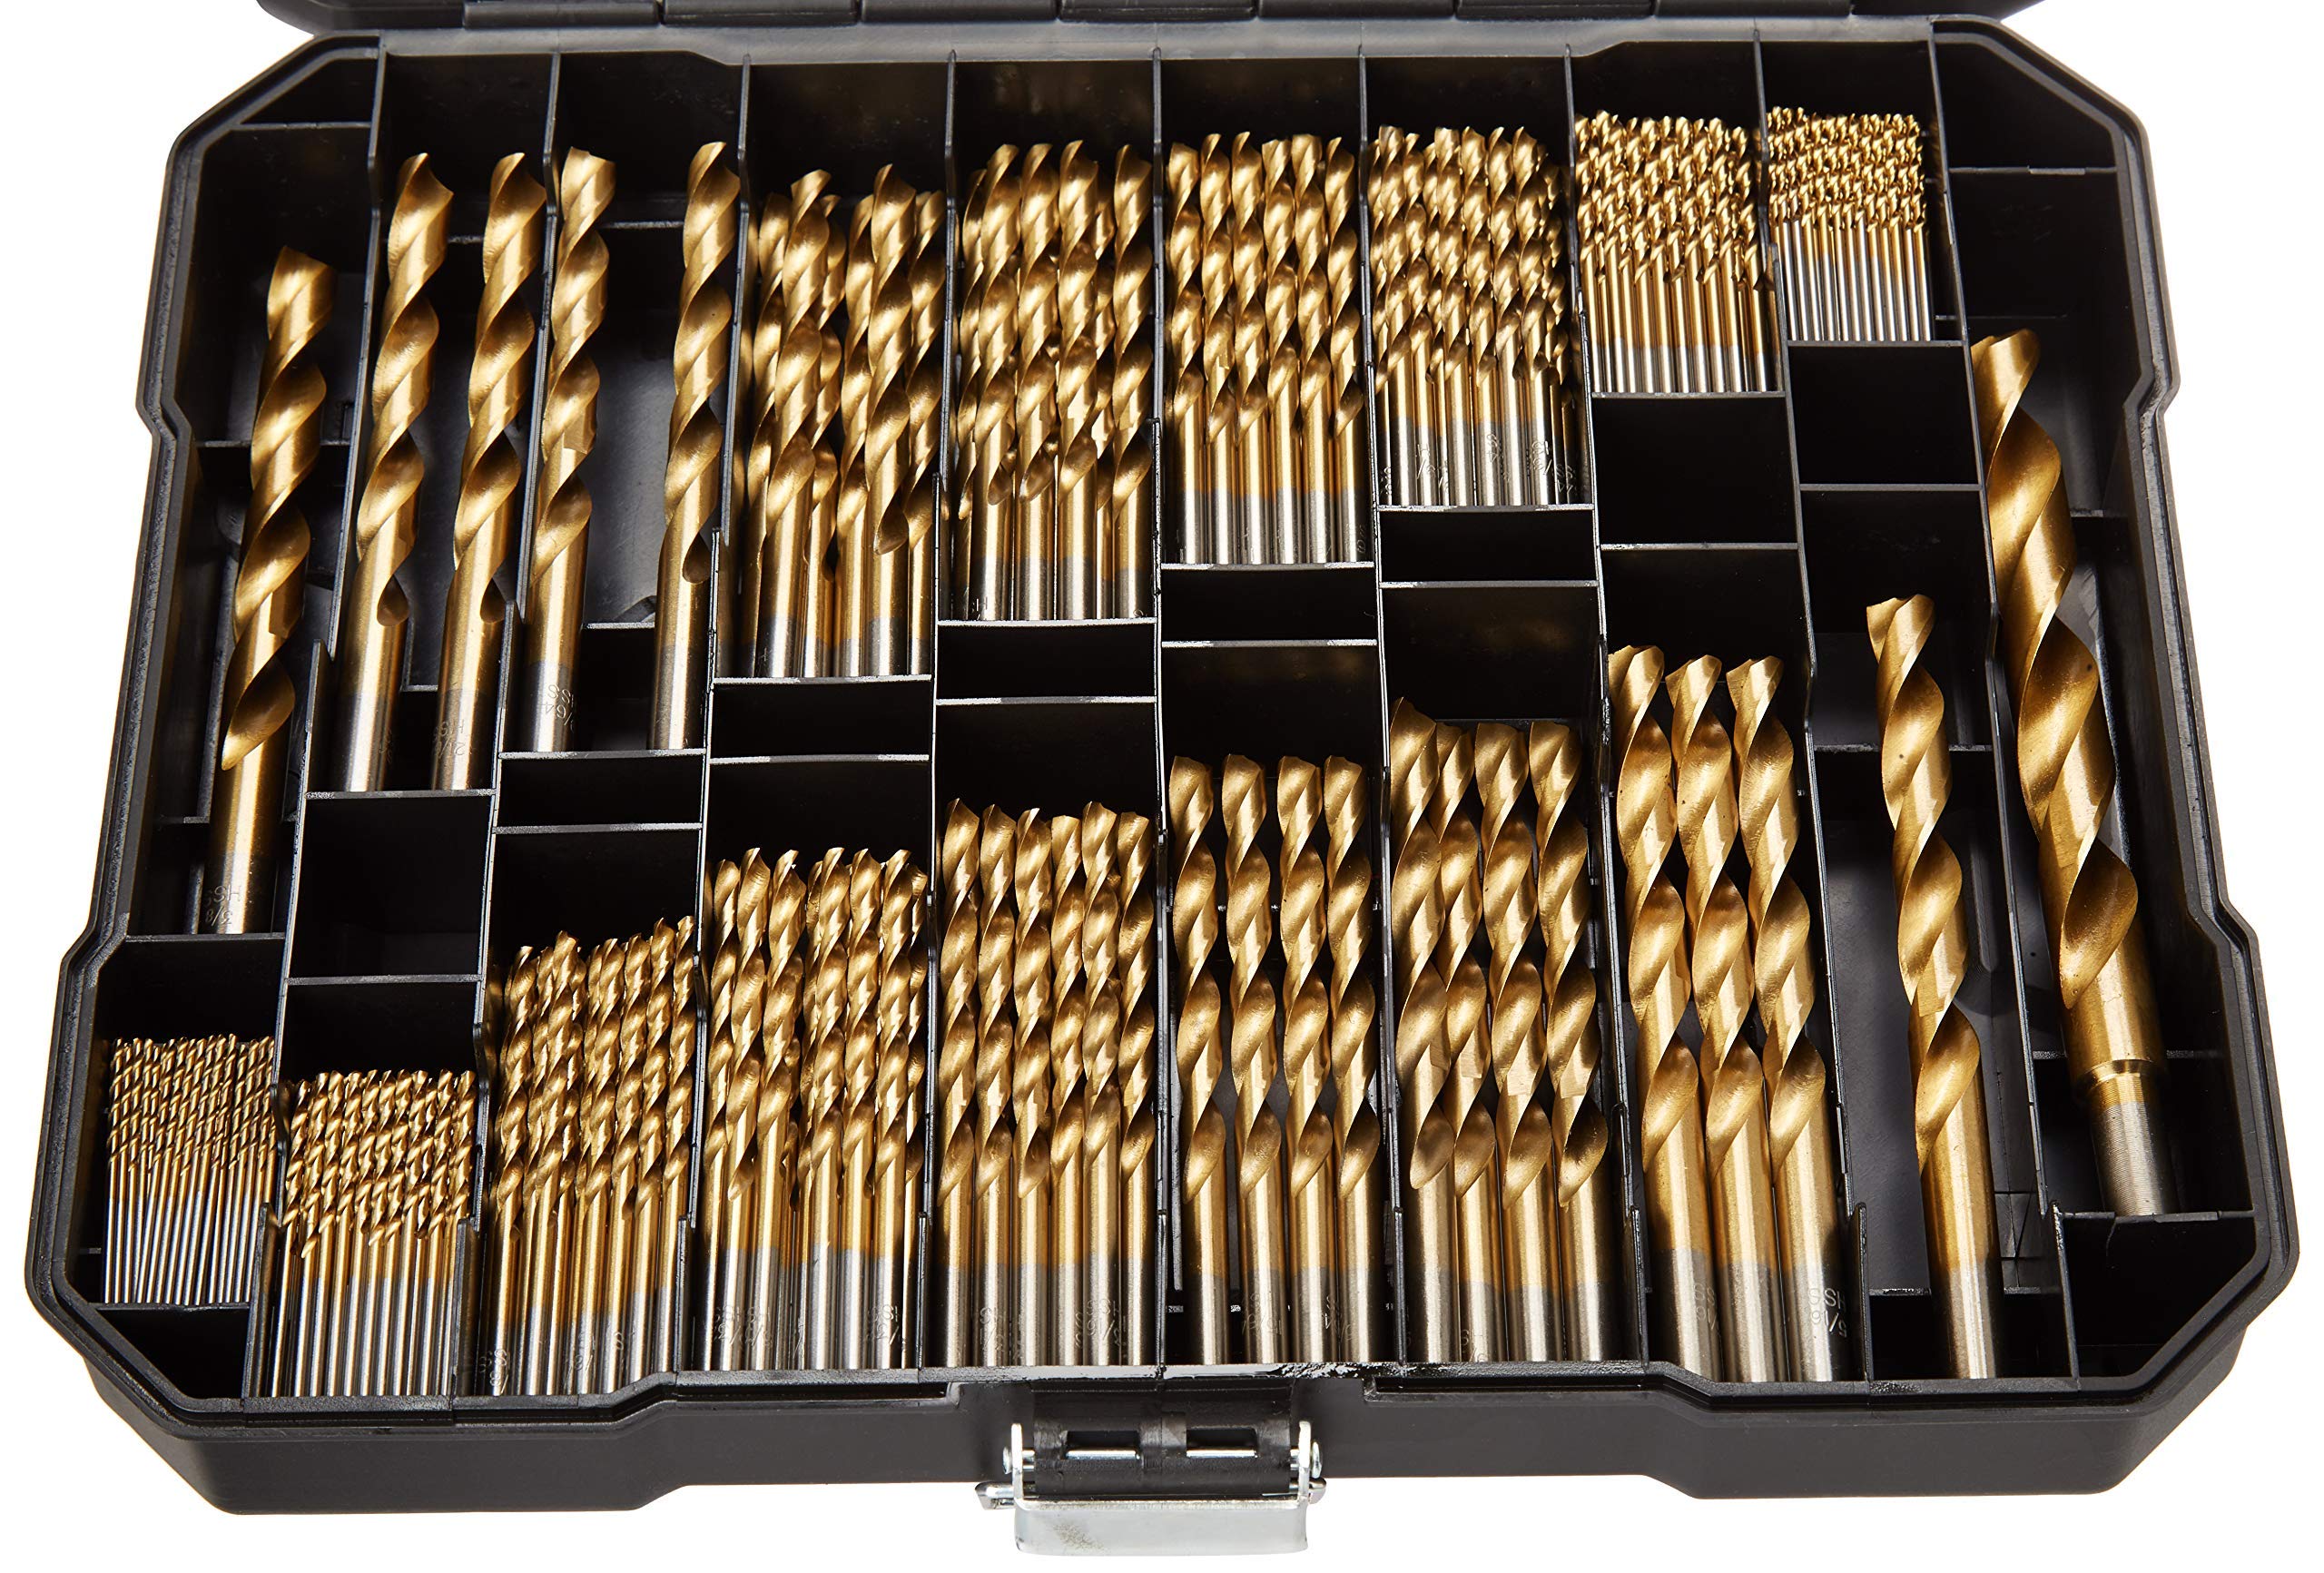 230 Pieces Titanium Twist Drill Bit Set, 135° Tip High Speed Steel, Size from 3/64" up to 1/2", Ideal Drilling in Wood/Cast Iron/Aluminum Alloy/Plastic/Fiberglass, with Hard Storage